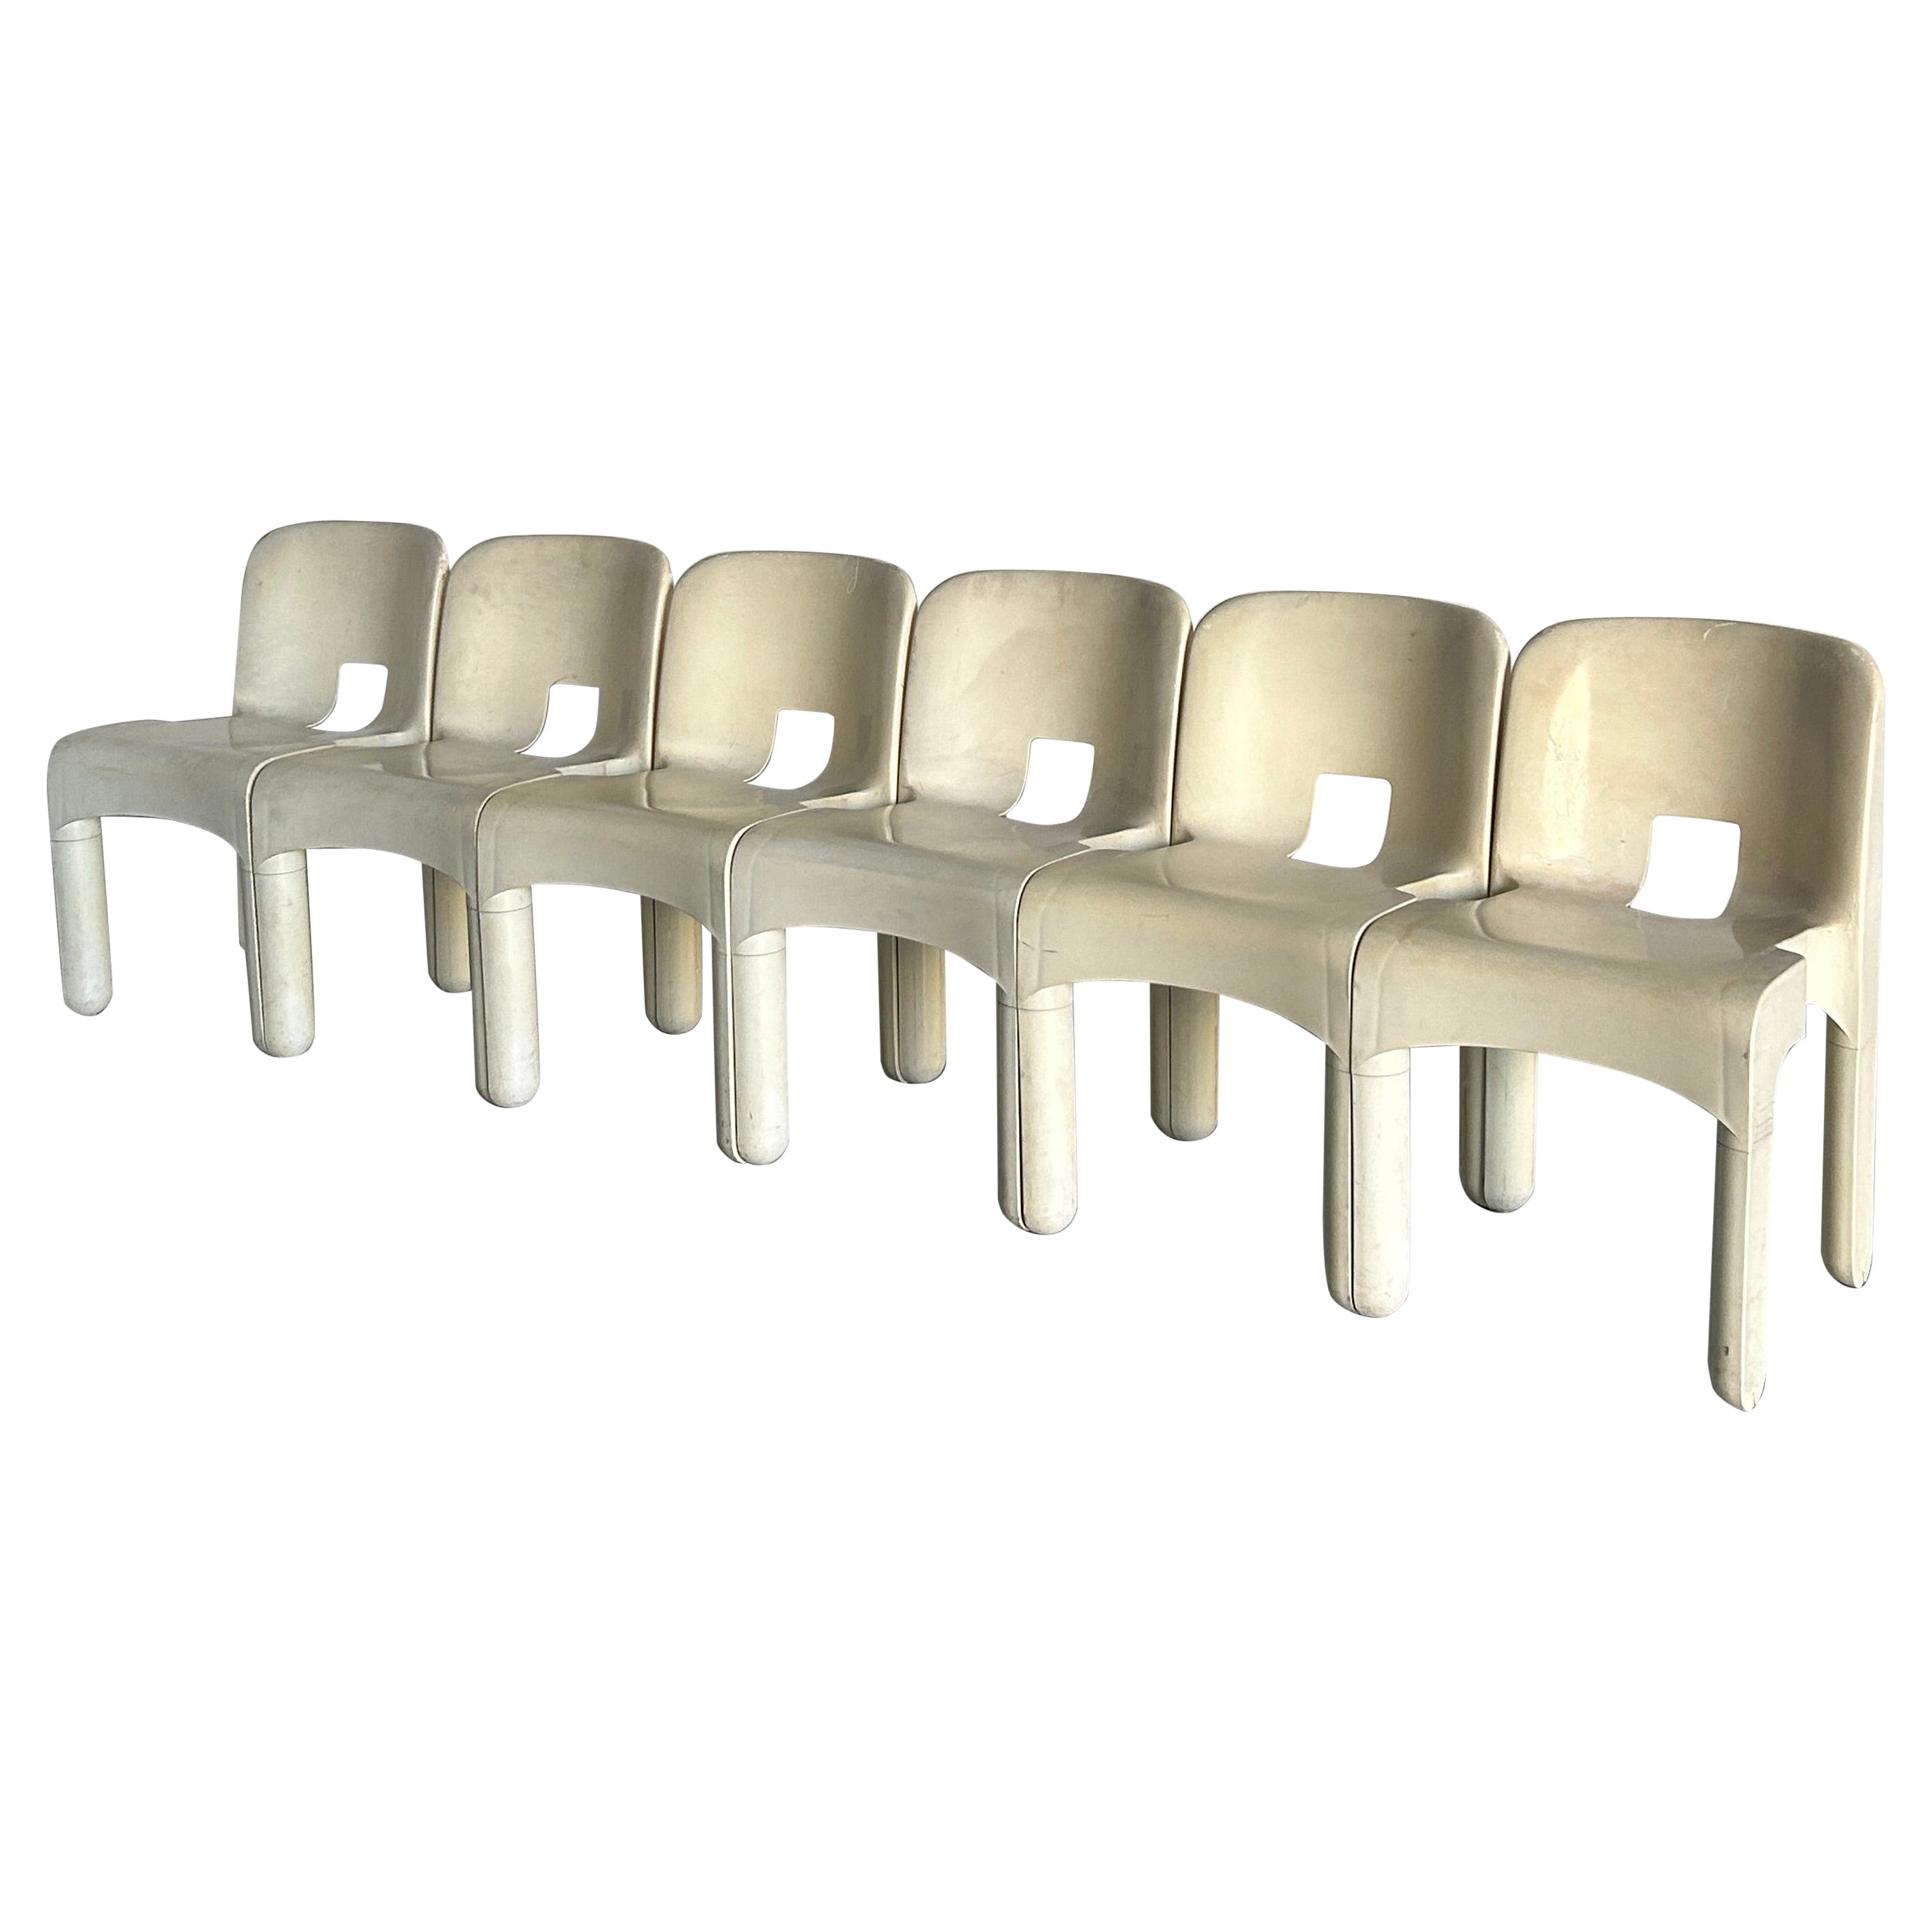 1 of 6 Joe Colombo Model '4867' or 'Universale' White Edition Chairs for Kartell